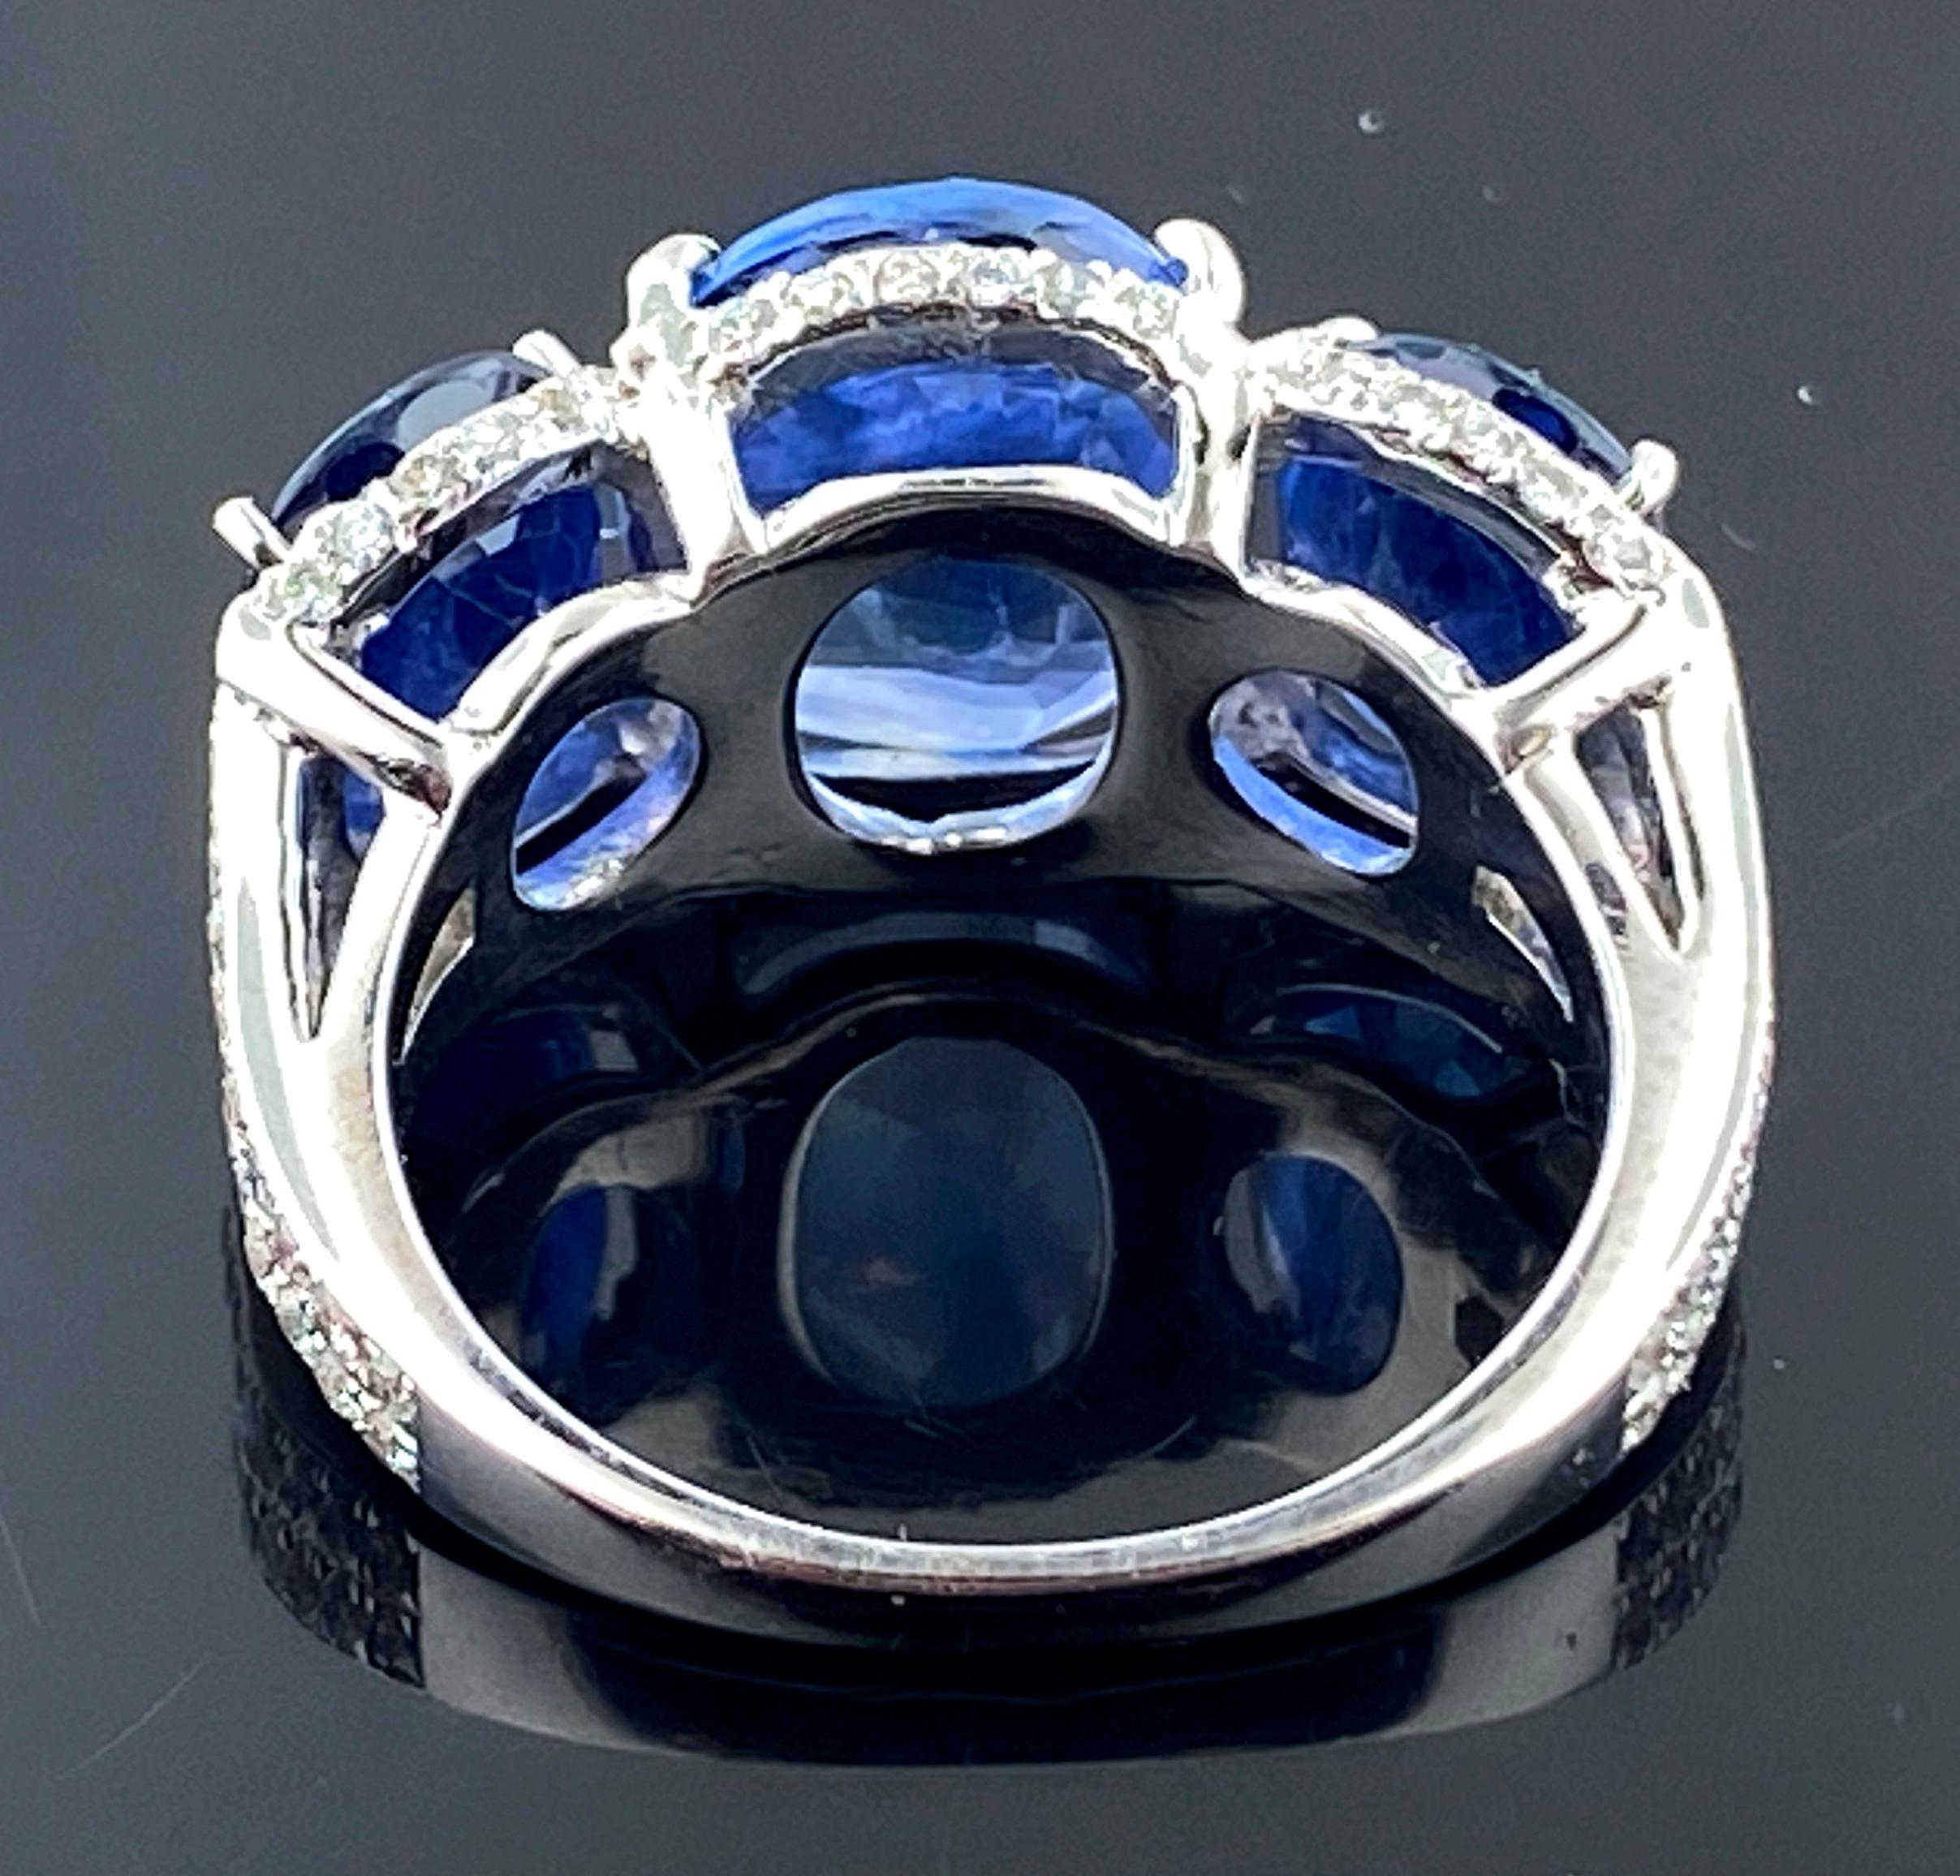 Platinum Ring with 3 Large Oval Cut Blue Sapphires and Diamonds 1